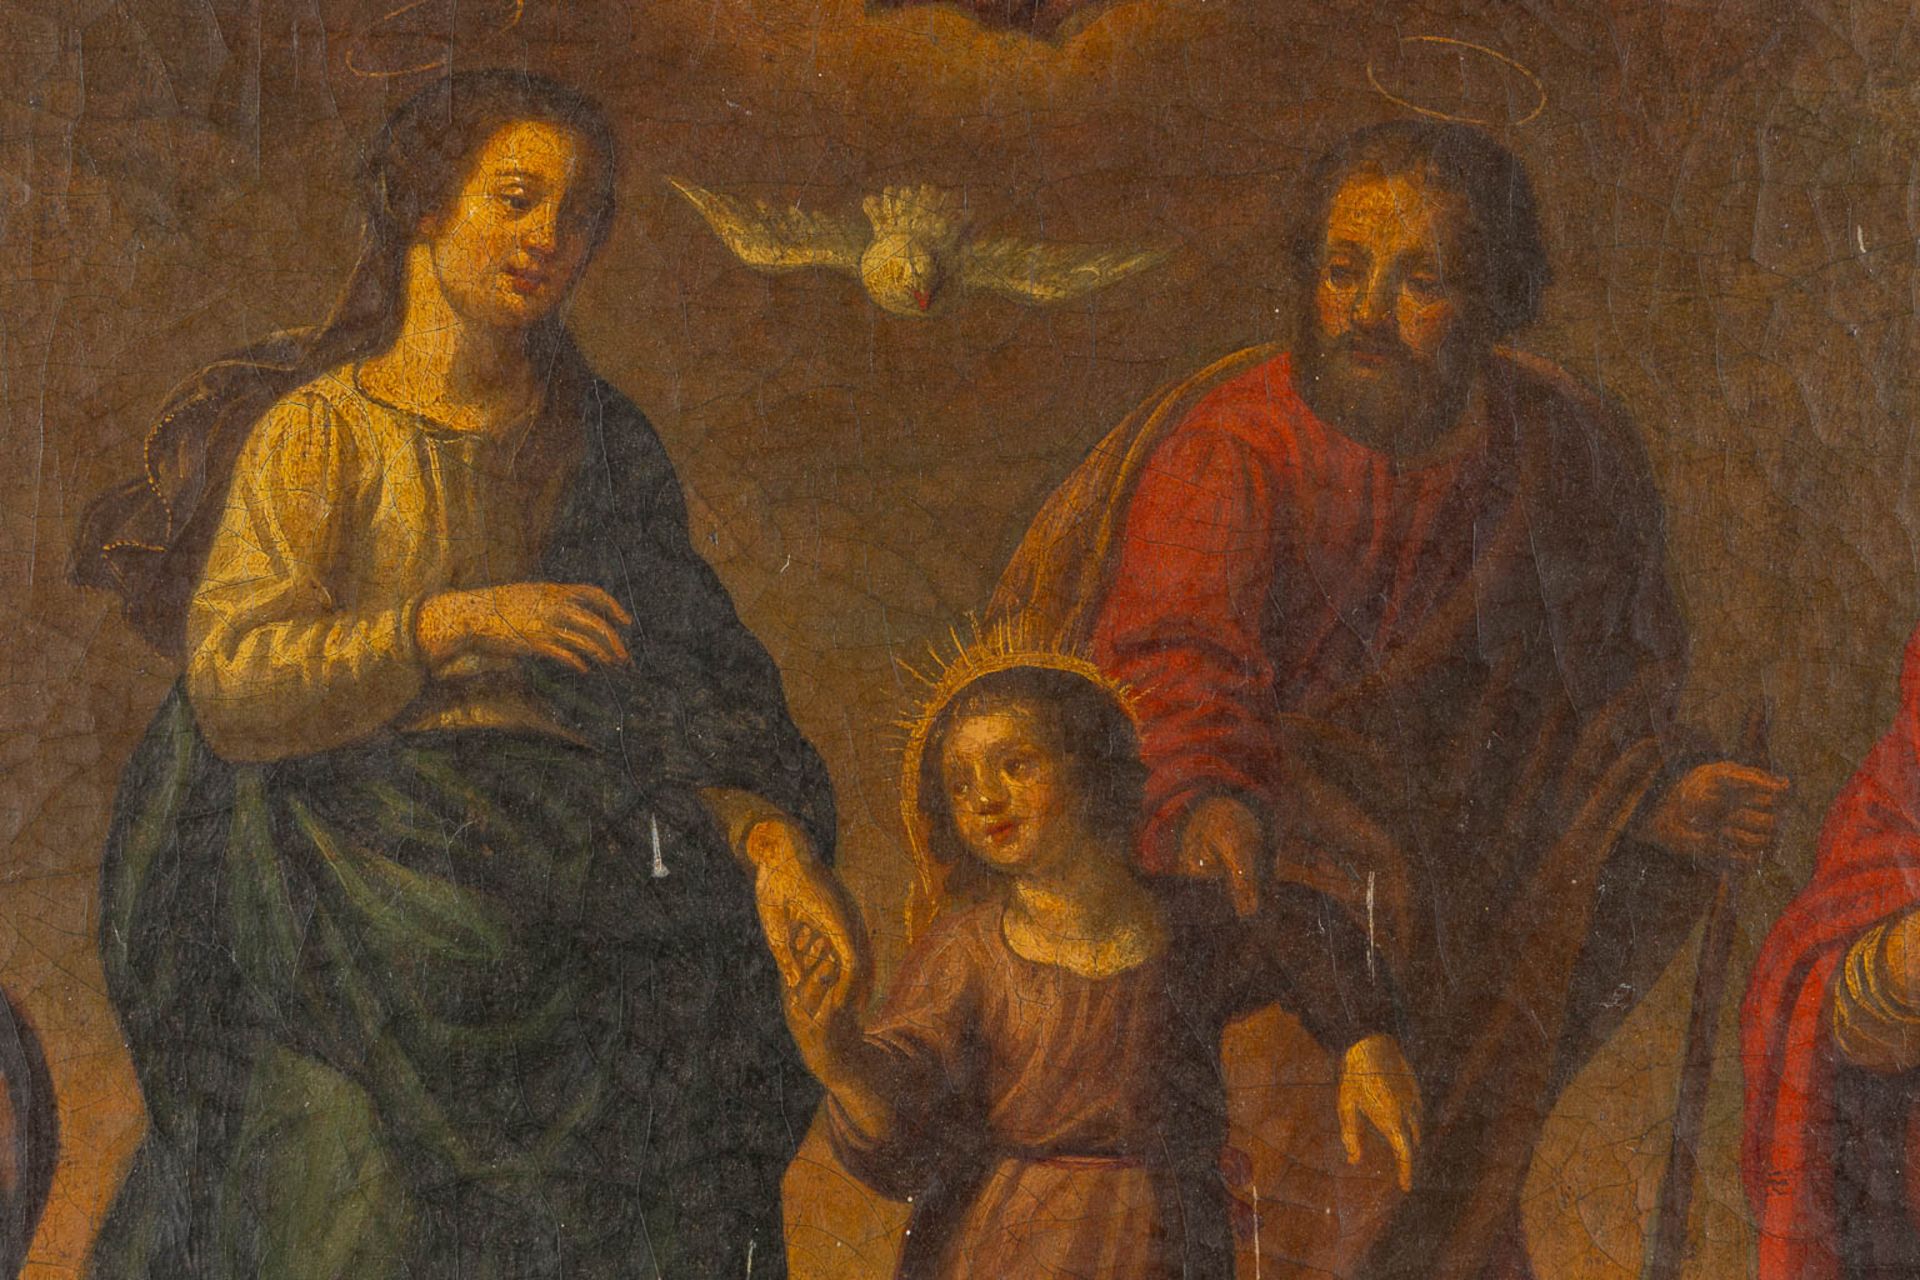 After Peter Paul Rubens, 'The Return of the Holy Family from Egypt', oil on canvas. (W:48 x H:58 cm) - Image 5 of 9